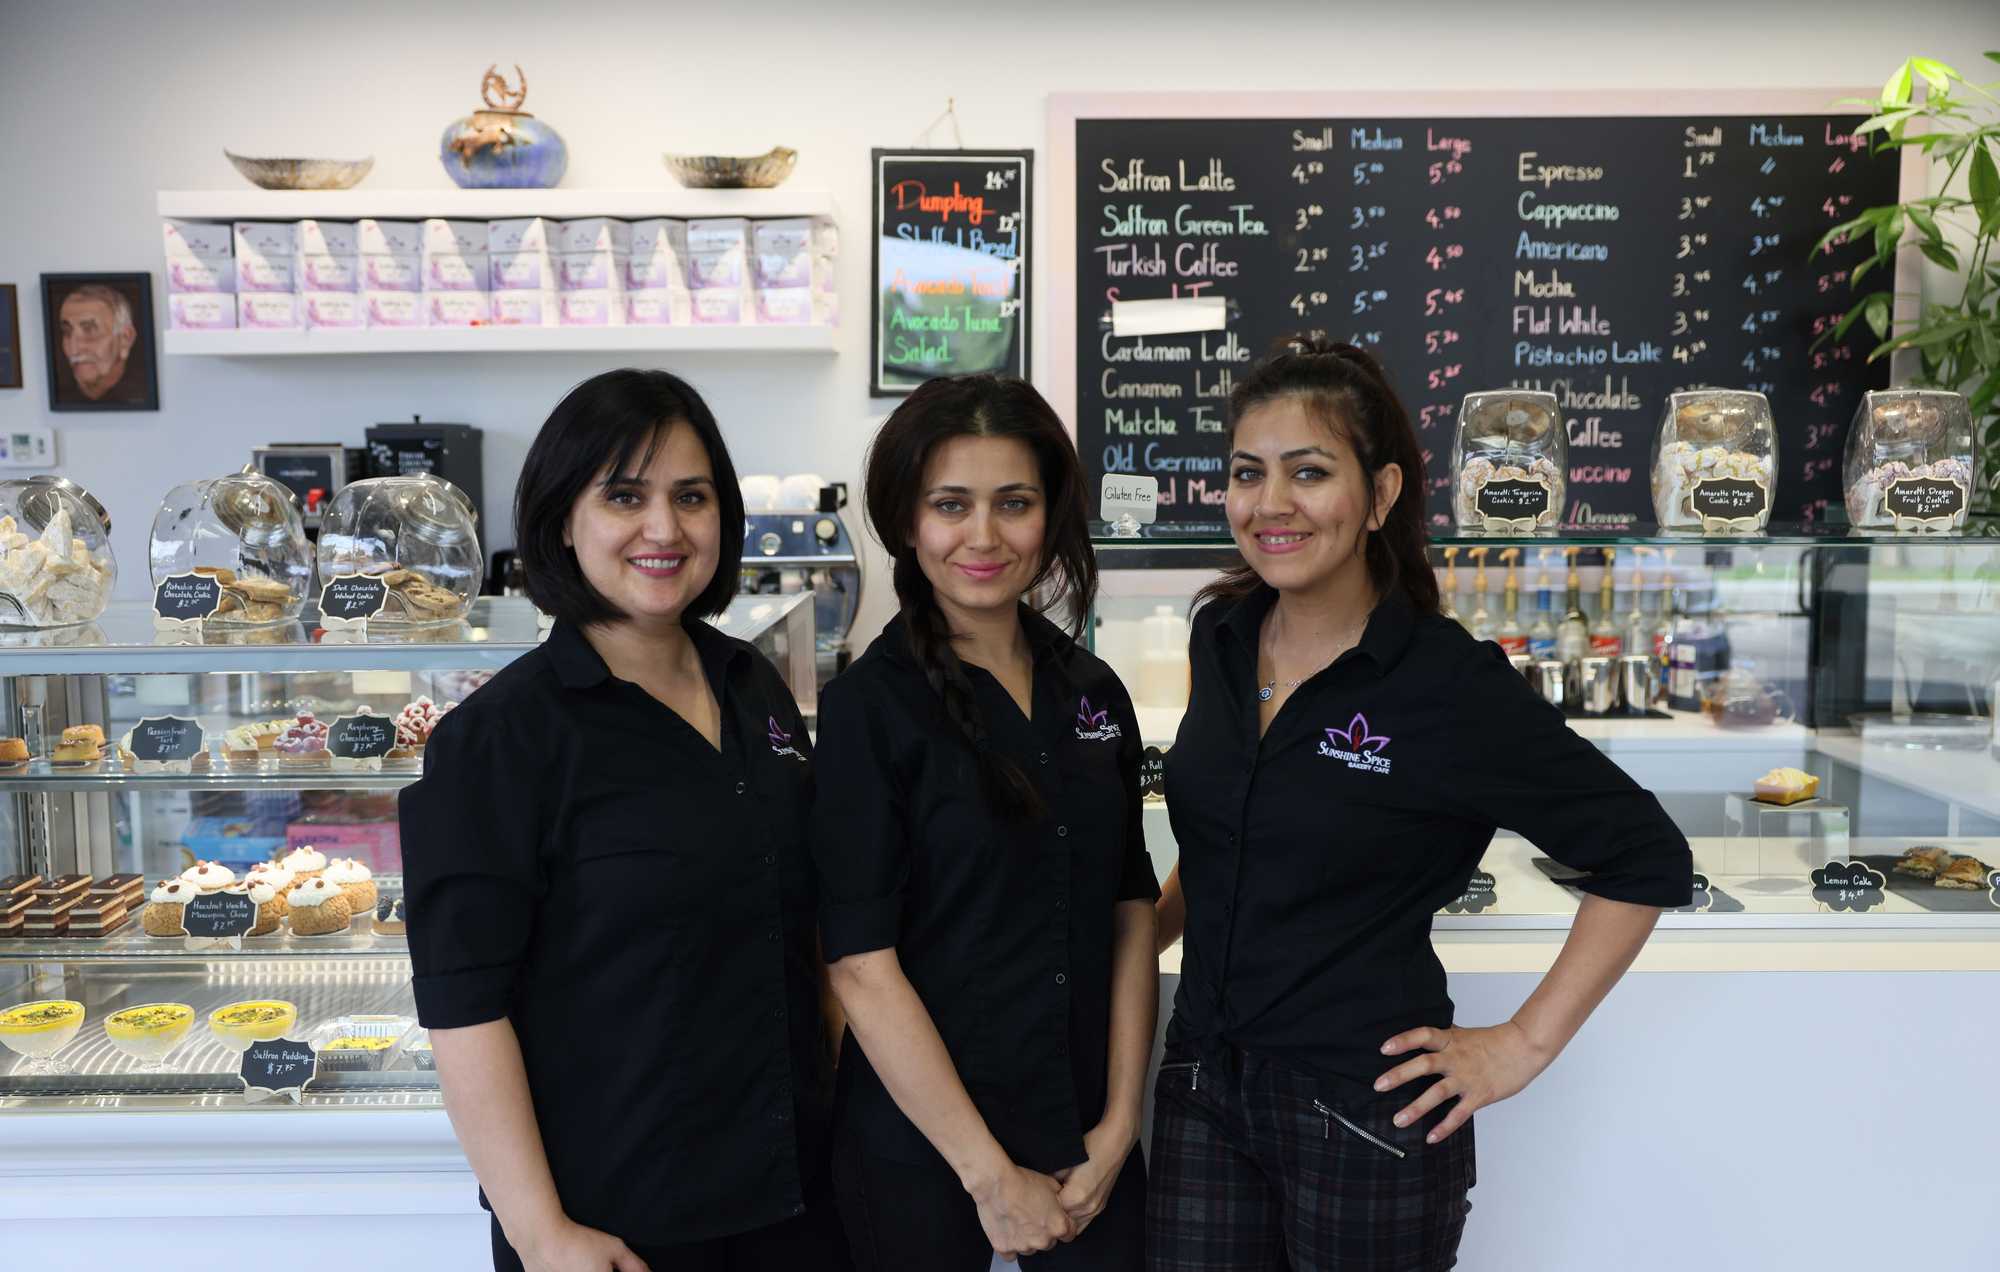  (L-R) Sisters Khatera Shams, Narges Shams and Homeyra Shams posed for a portrait inside Sunshine Spice Bakery & Cafe in Boise, Idaho. 